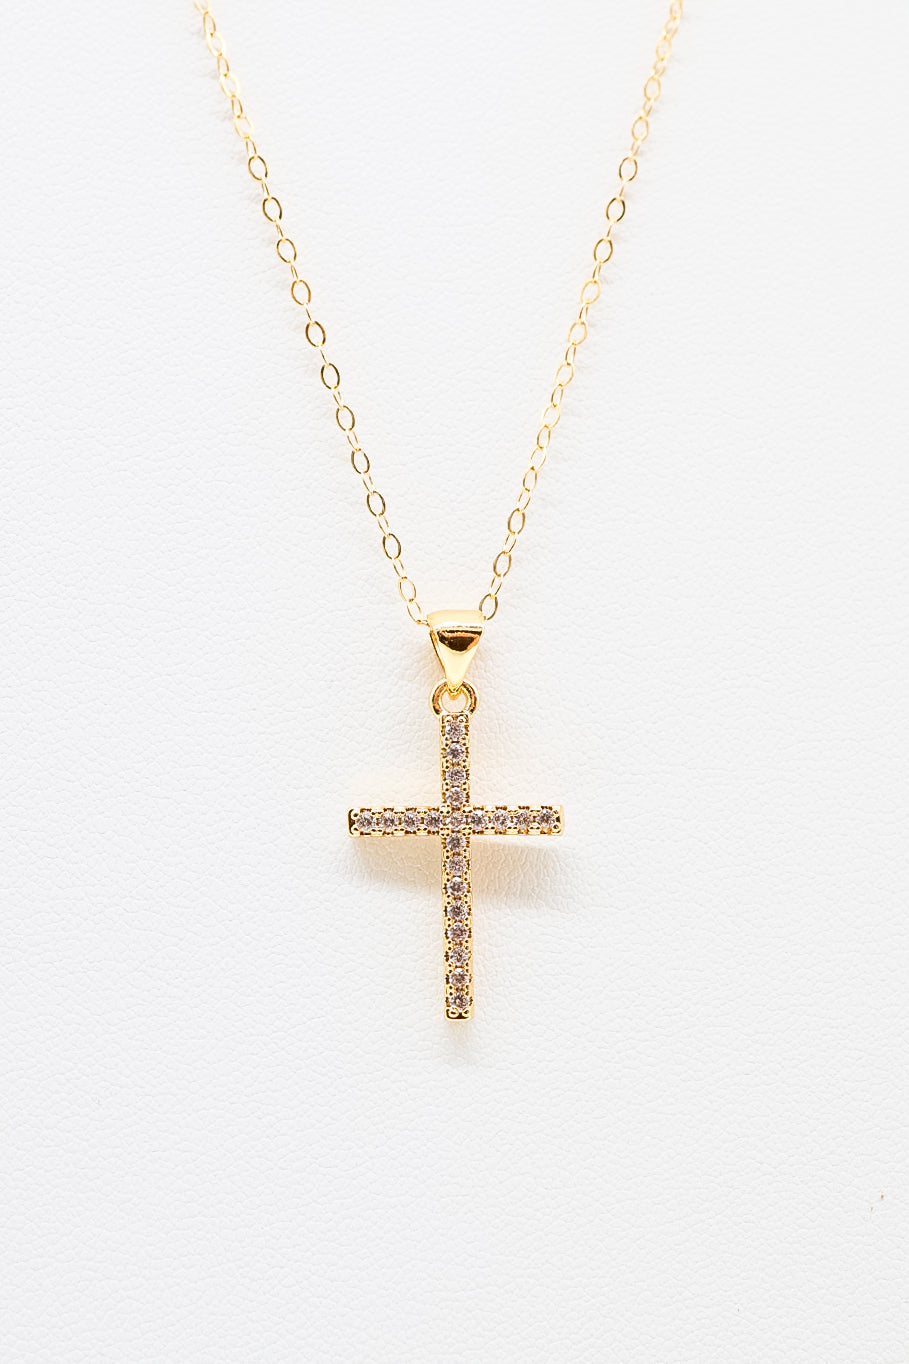 The Robyn Cross Necklace